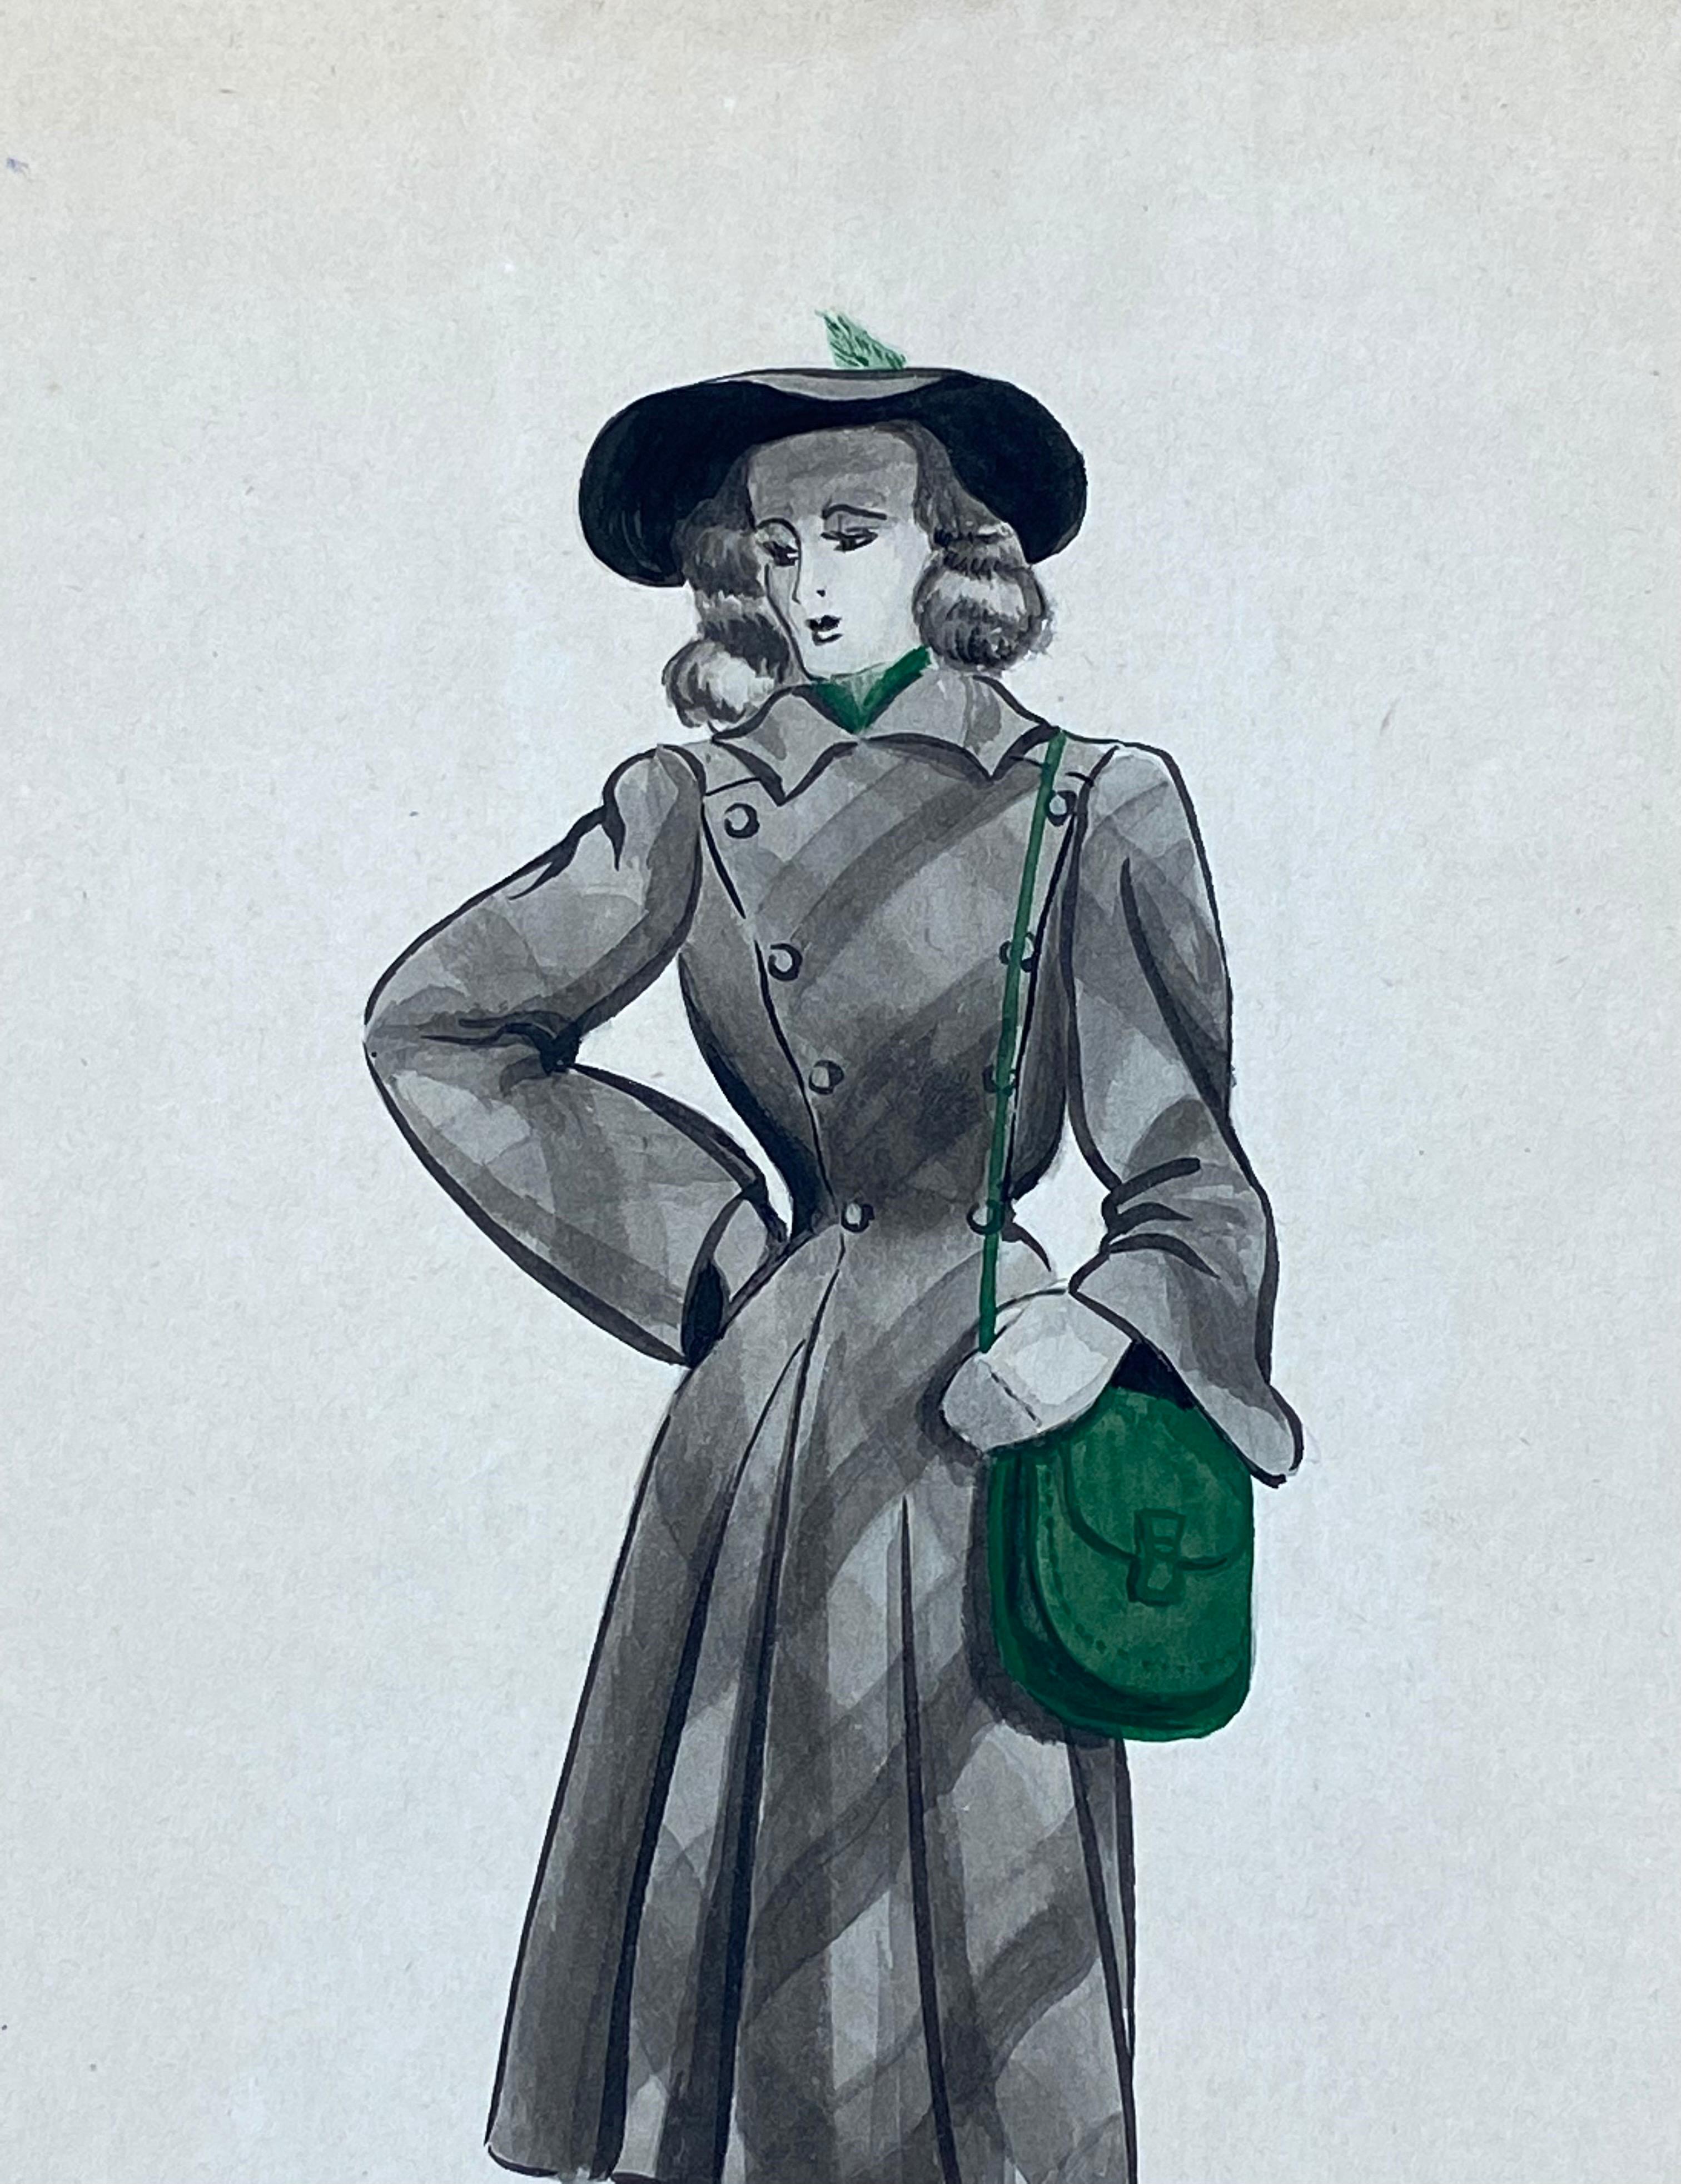 1940's French Fashion Illustration - The Stylish Lady With The Green Features - Art by Geneviève Thomas